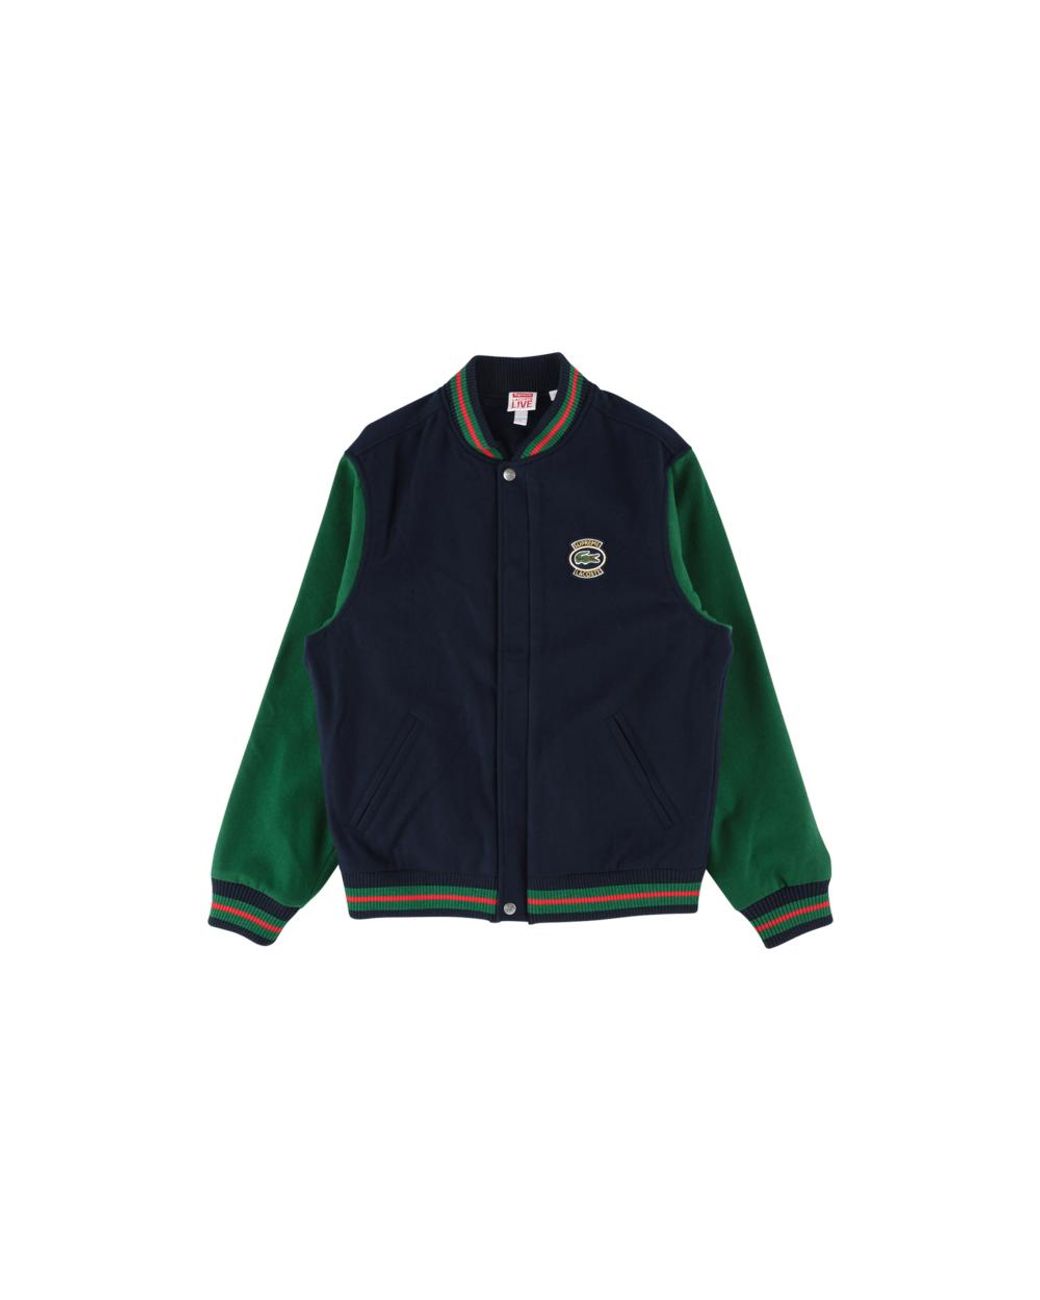 Lacoste Live Varsity jacket (Rare), Men's Fashion, Coats, Jackets and  Outerwear on Carousell